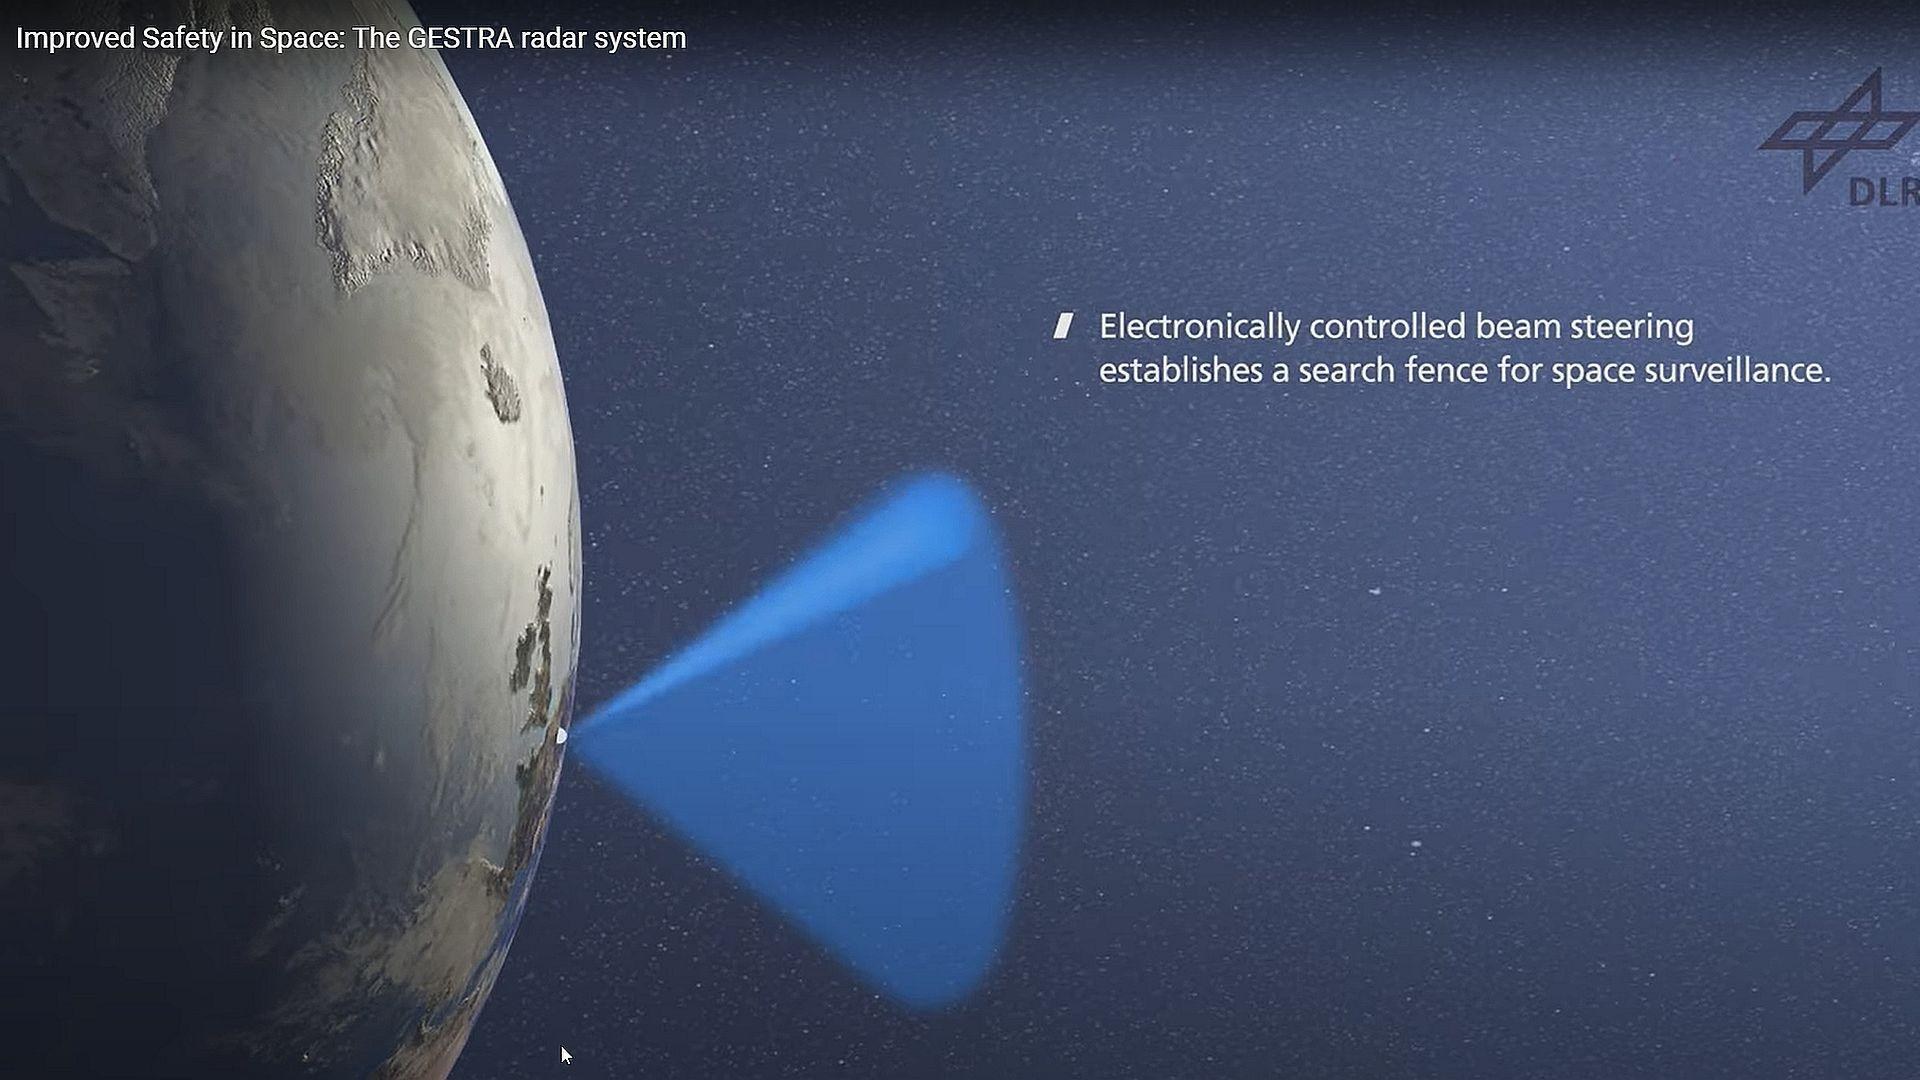 Video still: Improved Safety in Space: The GESTRA radar system